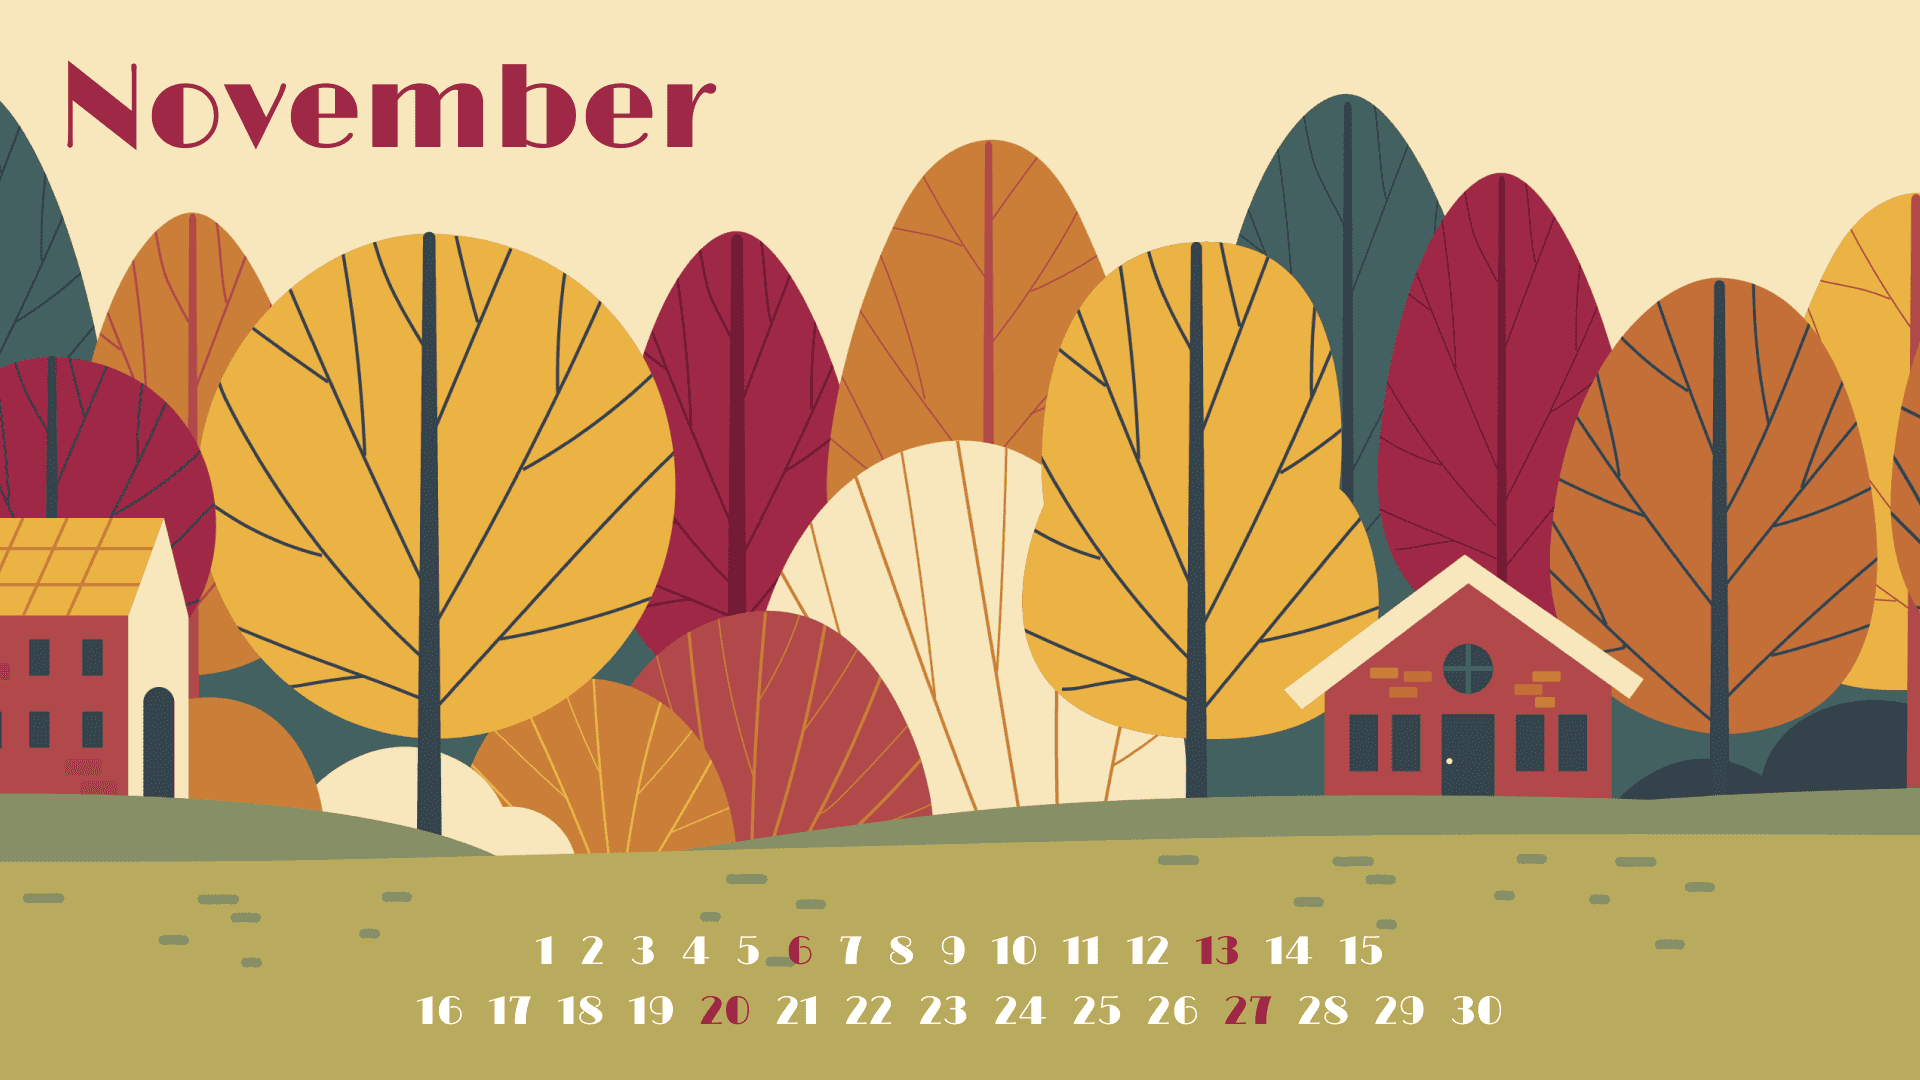 Free calendar for November in red and gold colors.